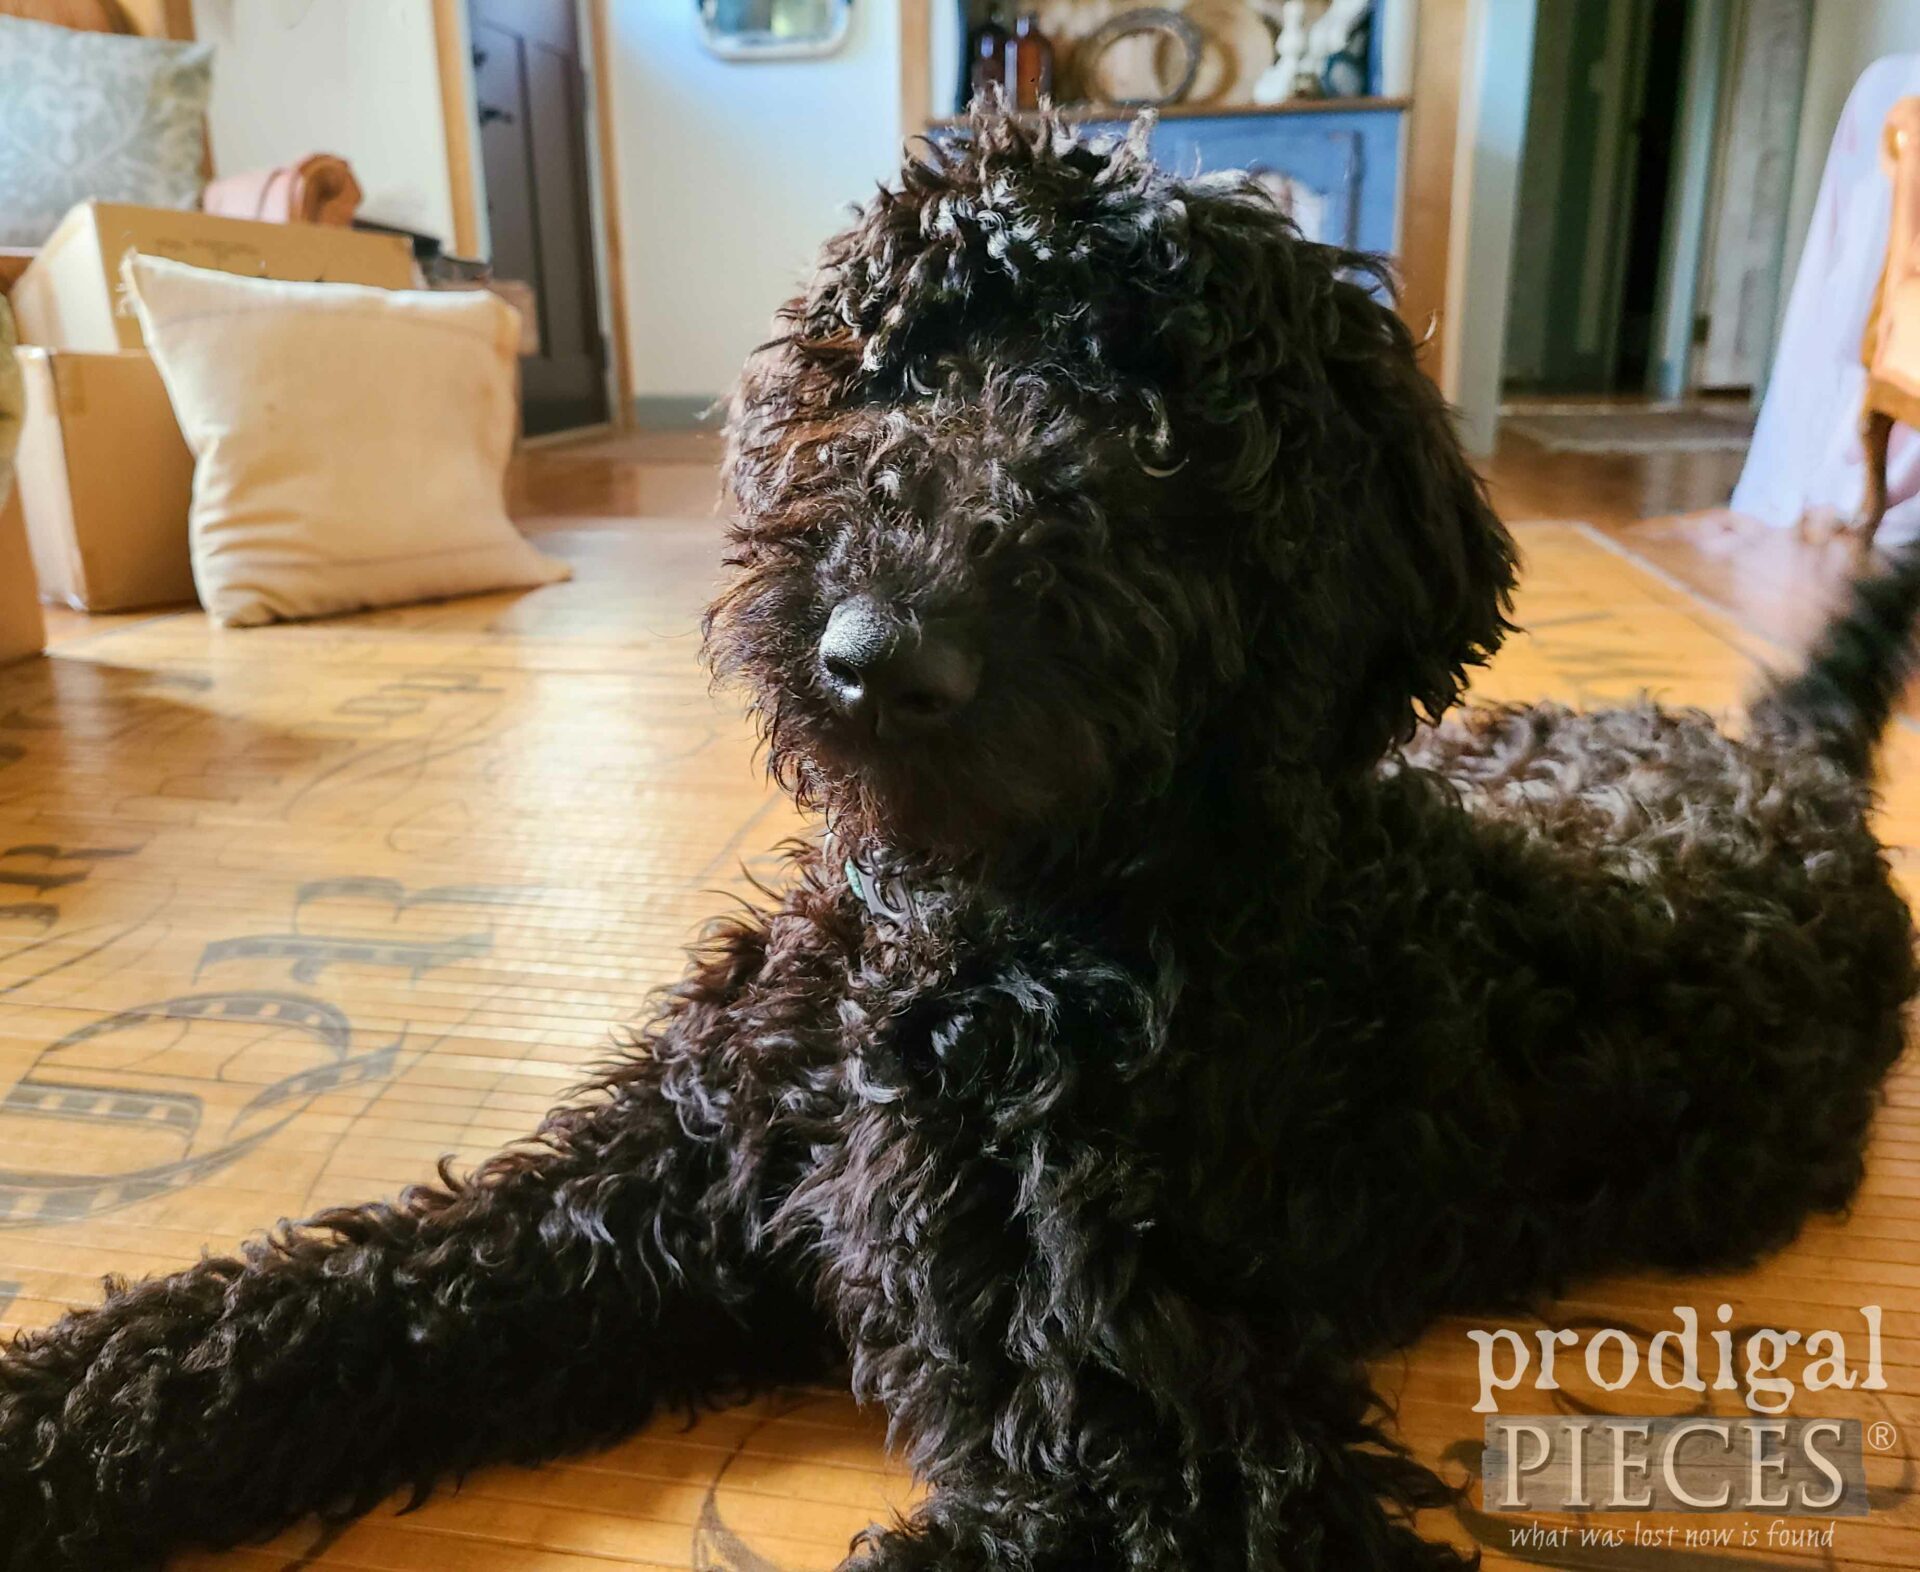 Loula the Goldendoodle Puppy New Family Member of Larissa of Prodigal Pieces | prodigalpieces.com #prodigalpieces #family #dogs #dogsarefamily